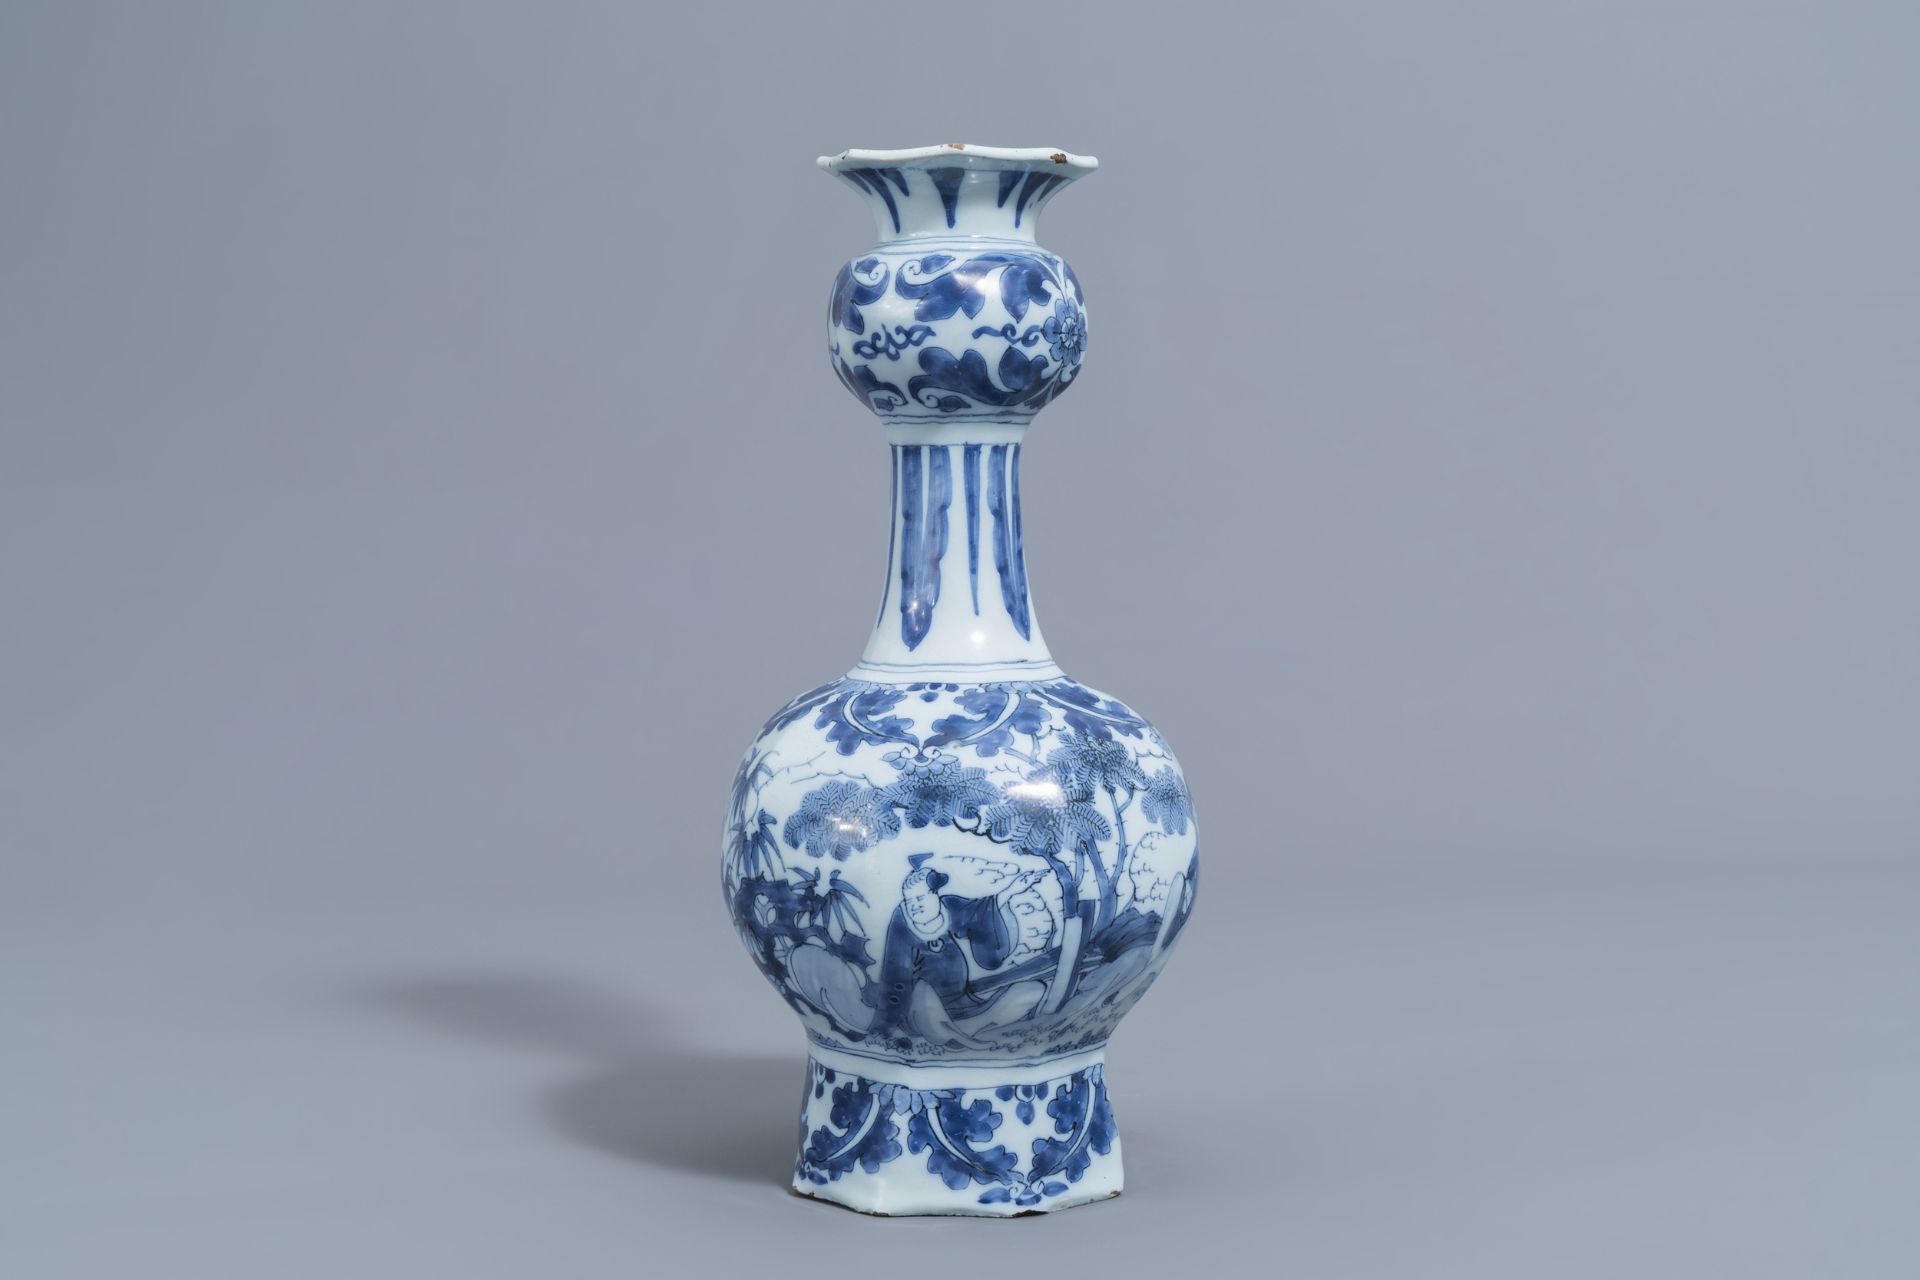 A Dutch Delft blue and white 'chinoiserie' garlic neck bottle vase, late 17th C. - Image 2 of 6